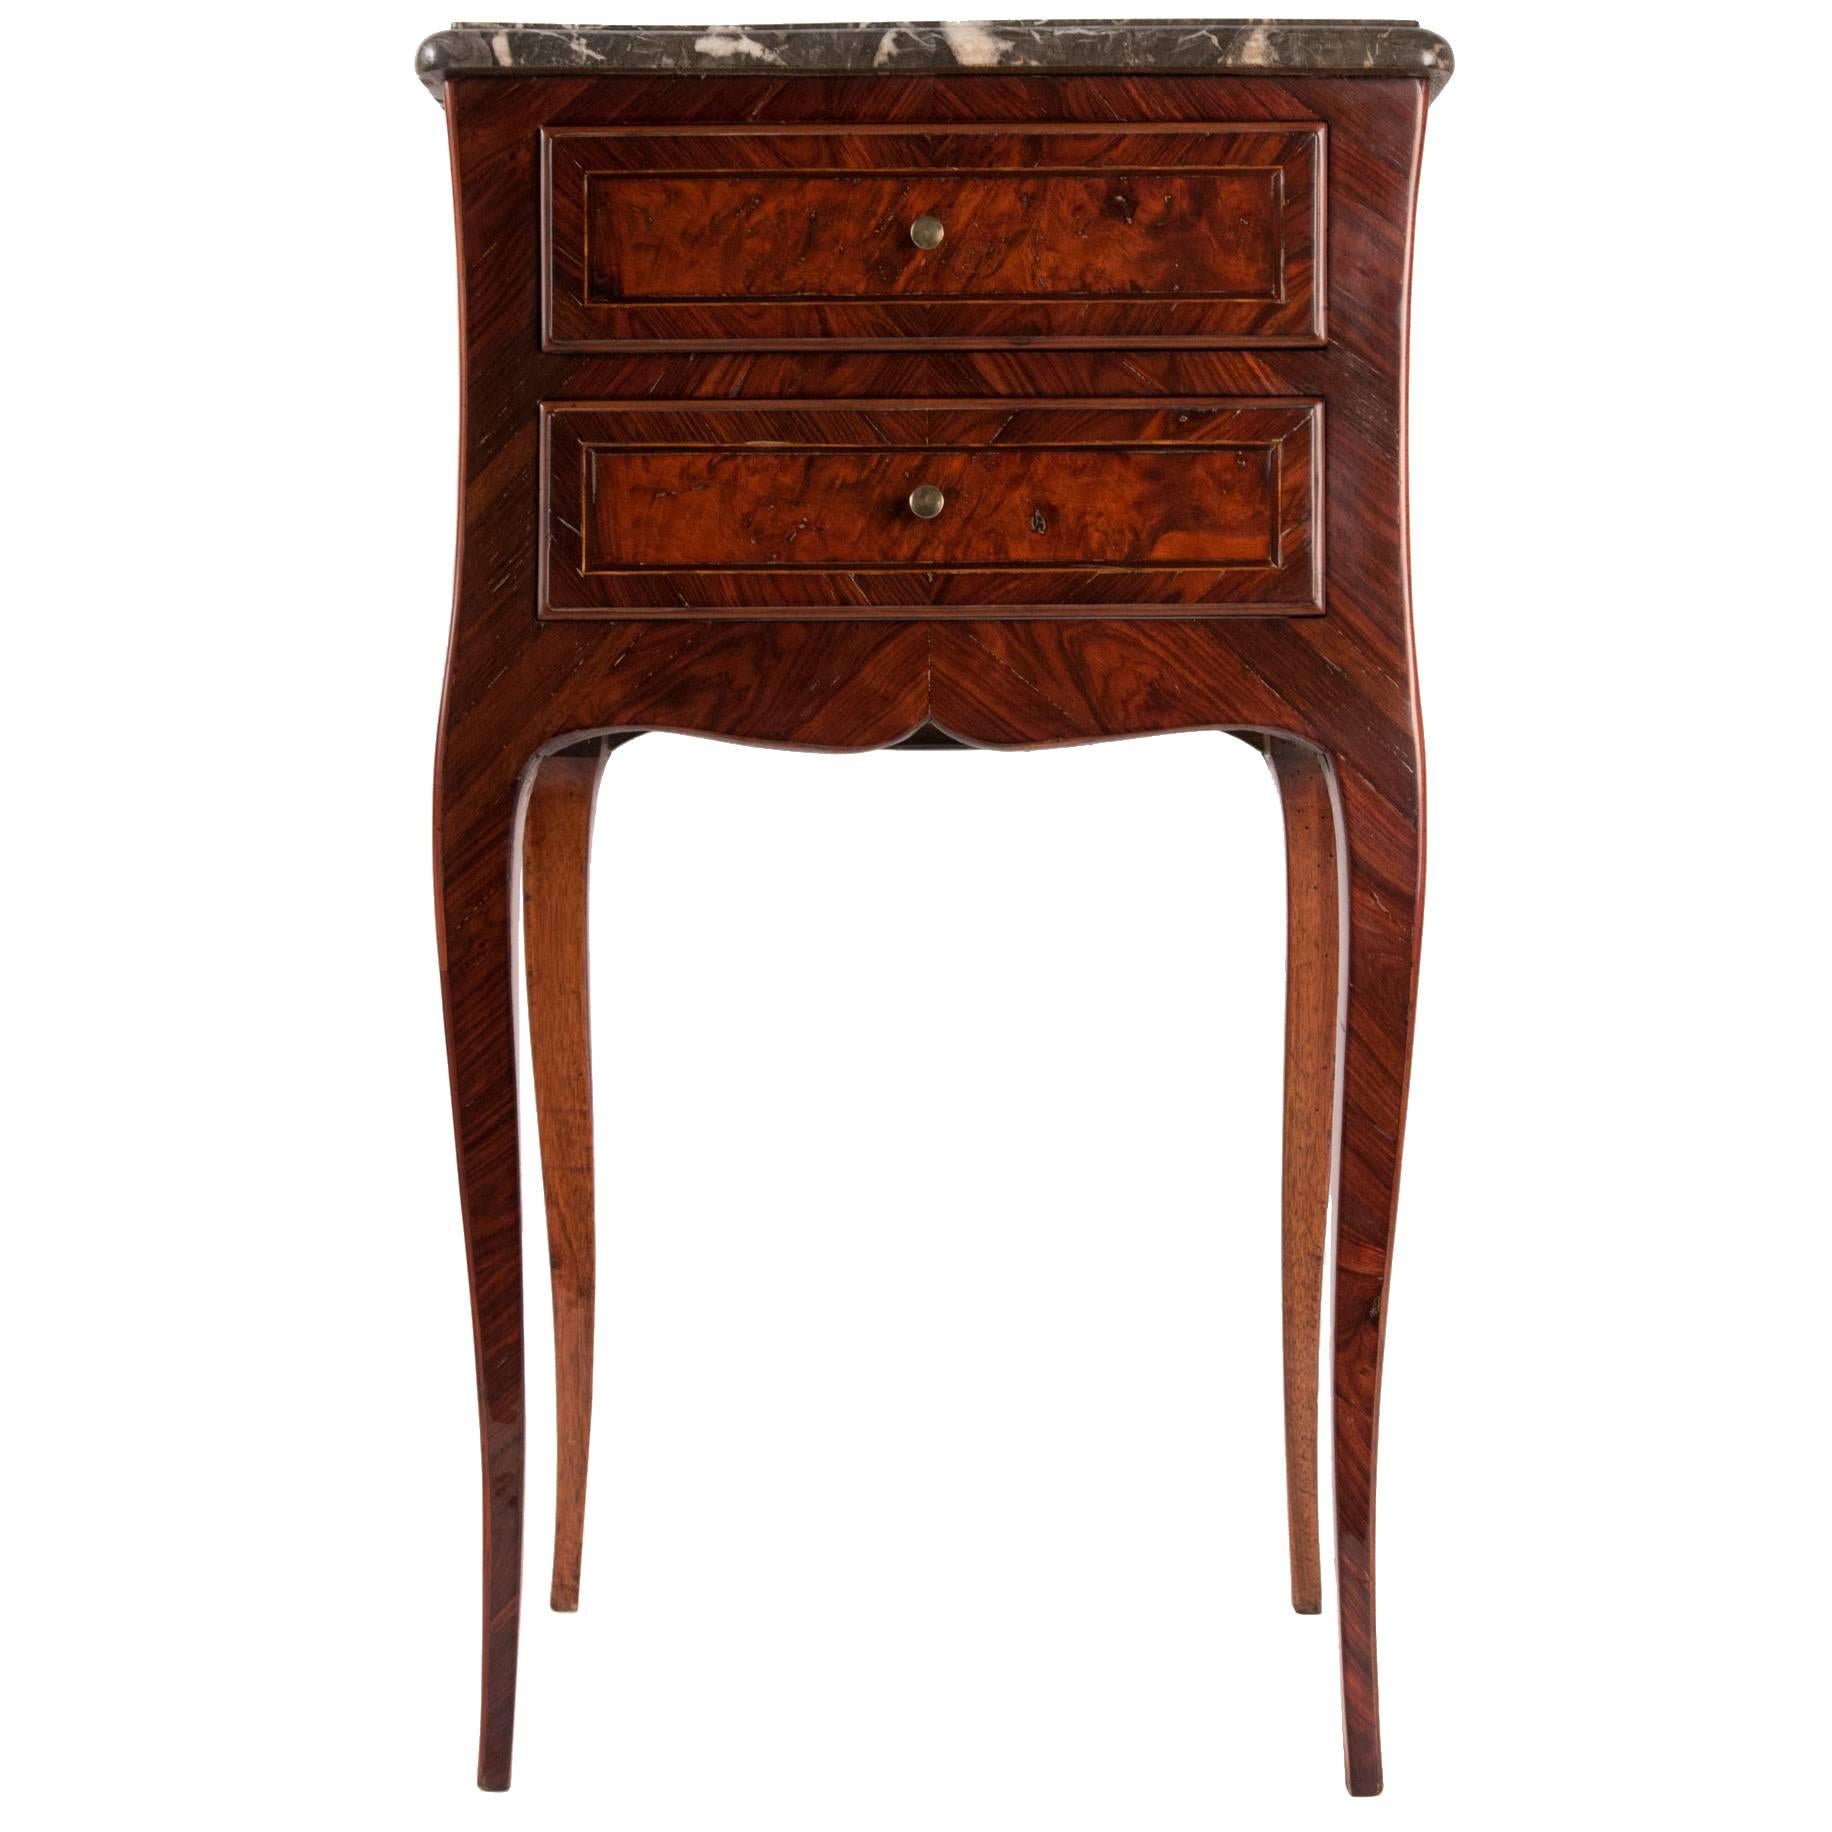 French Small Louis XV Style Serpentine Commode with Marble Top, circa 1820-1830 For Sale